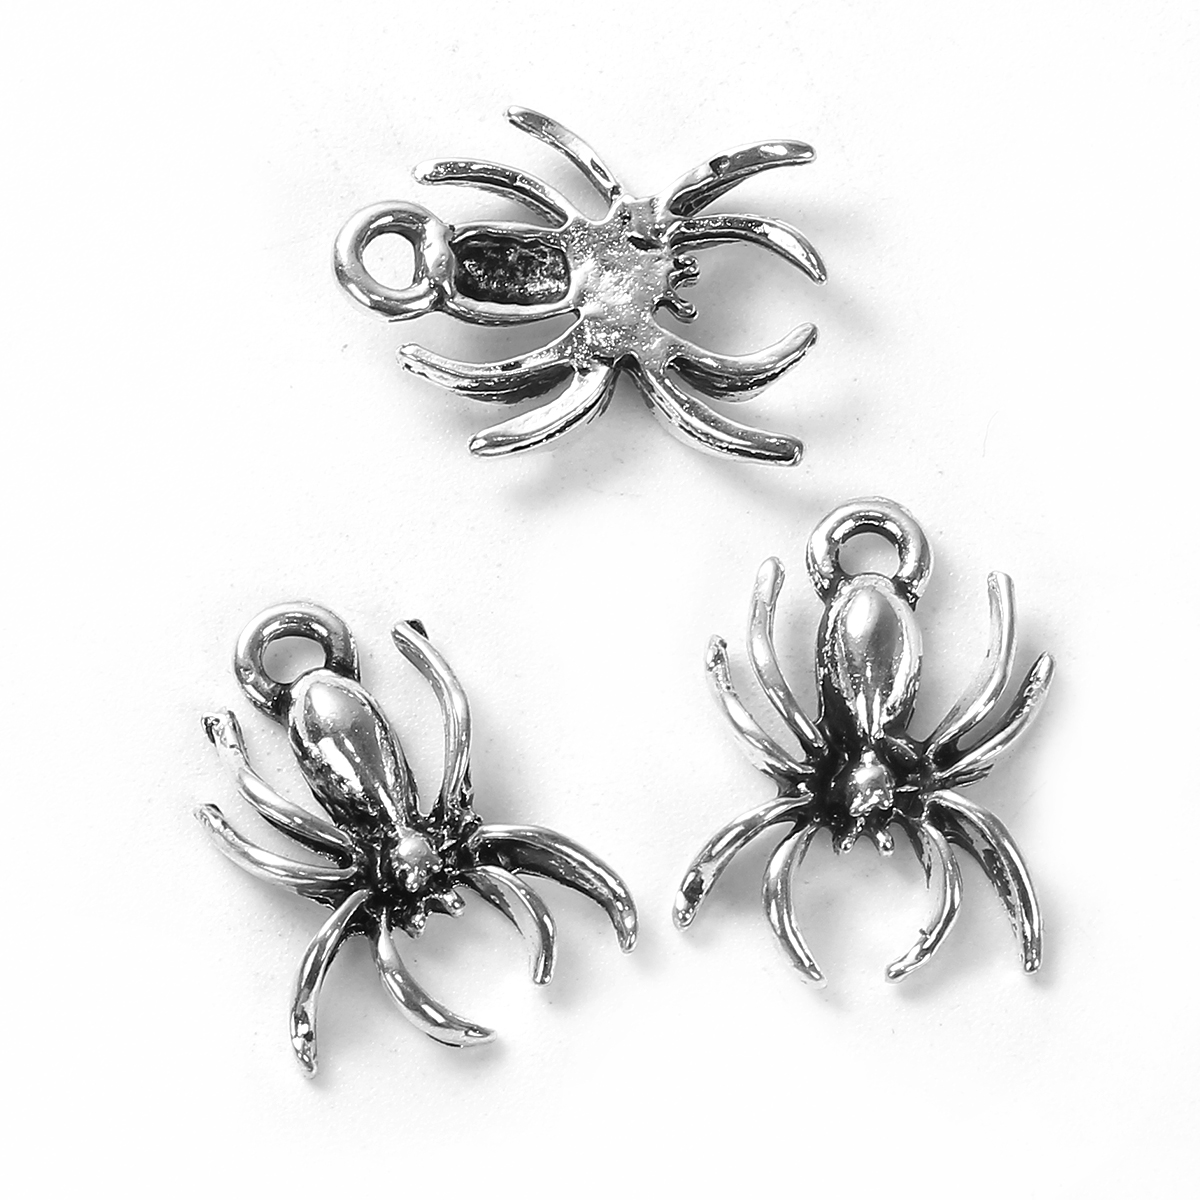 Picture of Zinc Based Alloy (Lead & Nickel Safe) Charms Halloween Spider Animal Antique Silver 18mm( 6/8") x 13mm( 4/8"), 30 PCs